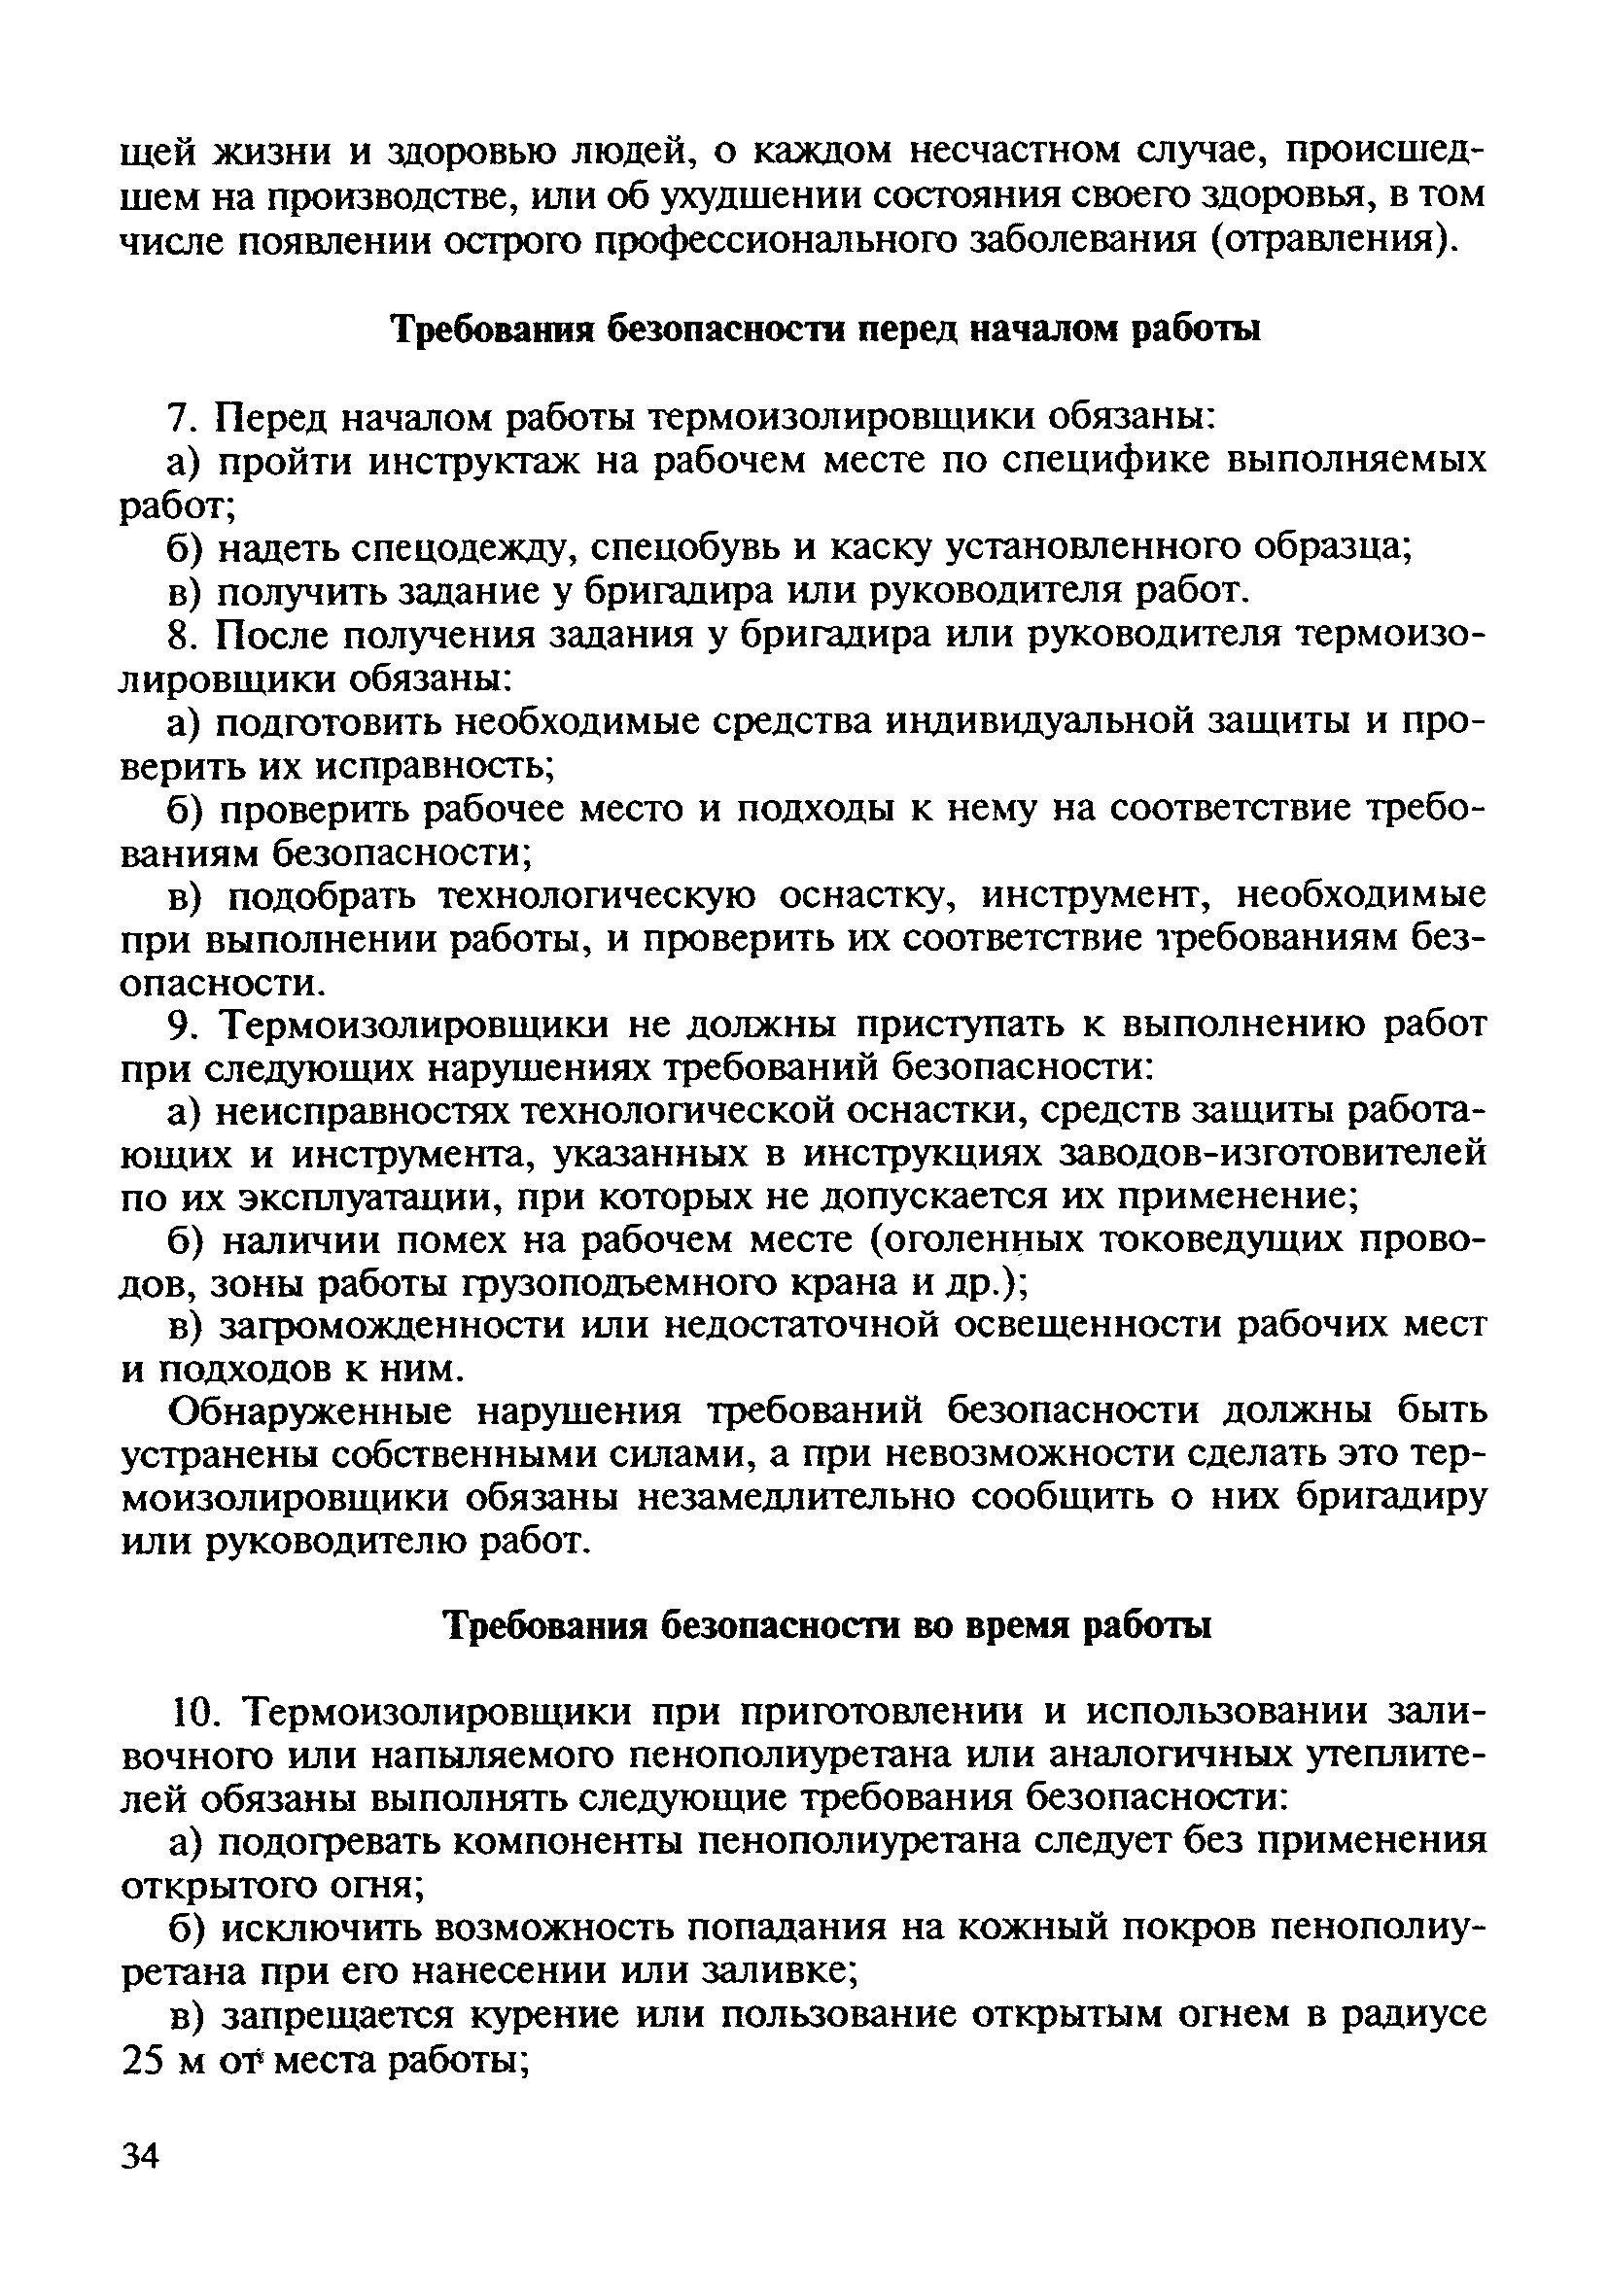 ТИ Р О-011-2003